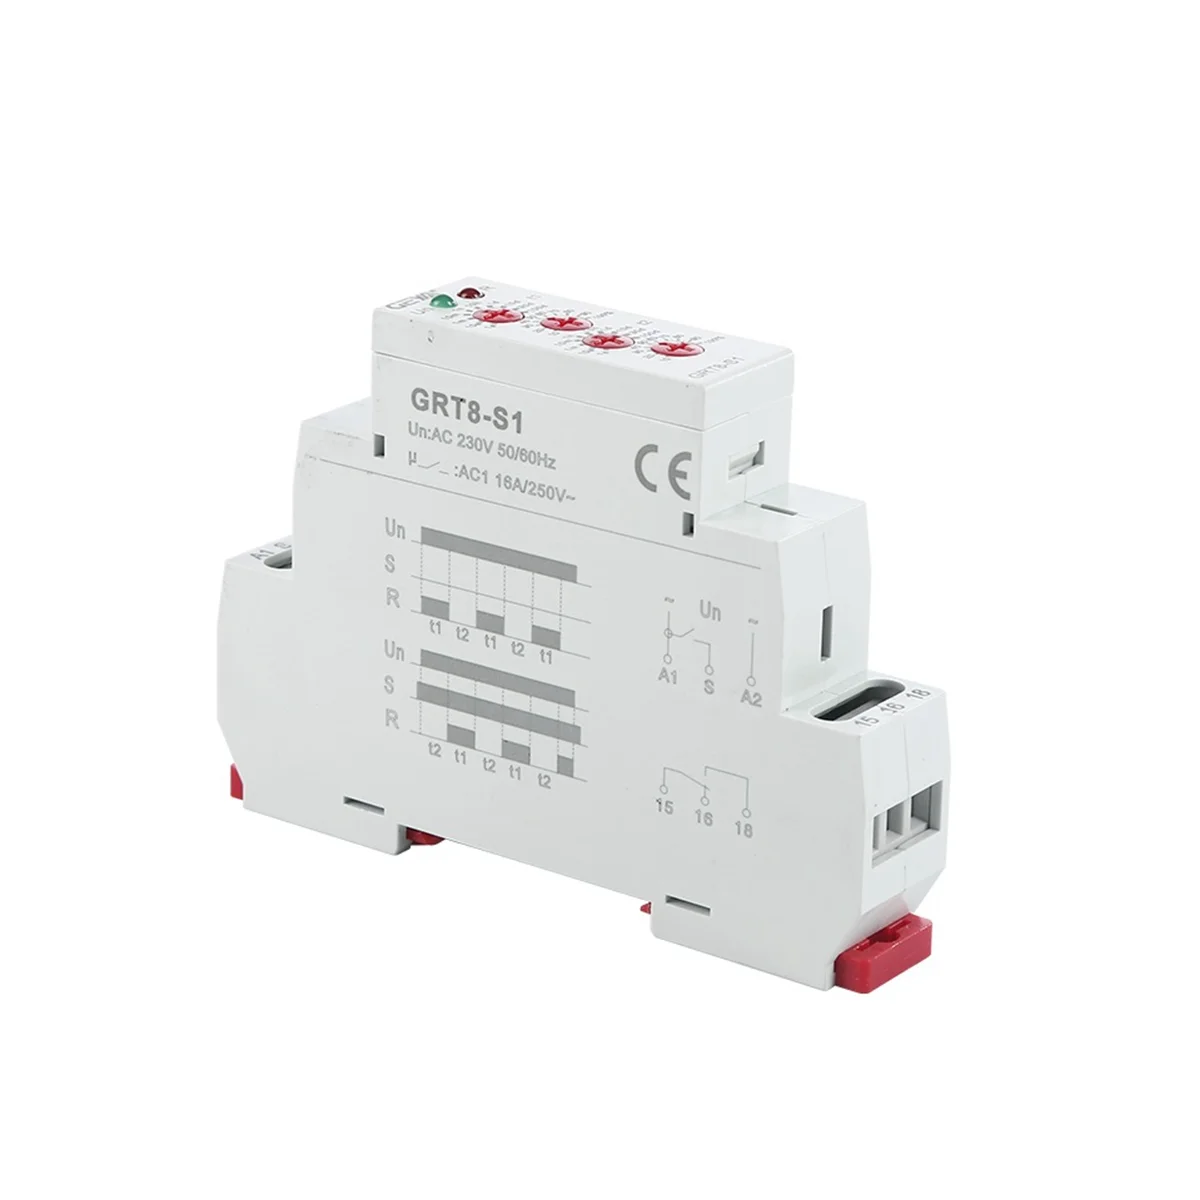 

GEYA GRT8-S Asymmetric Cycle Timer Relay SPDT 16A Electronic Repeat Relay, GRT8-S1 AC230V